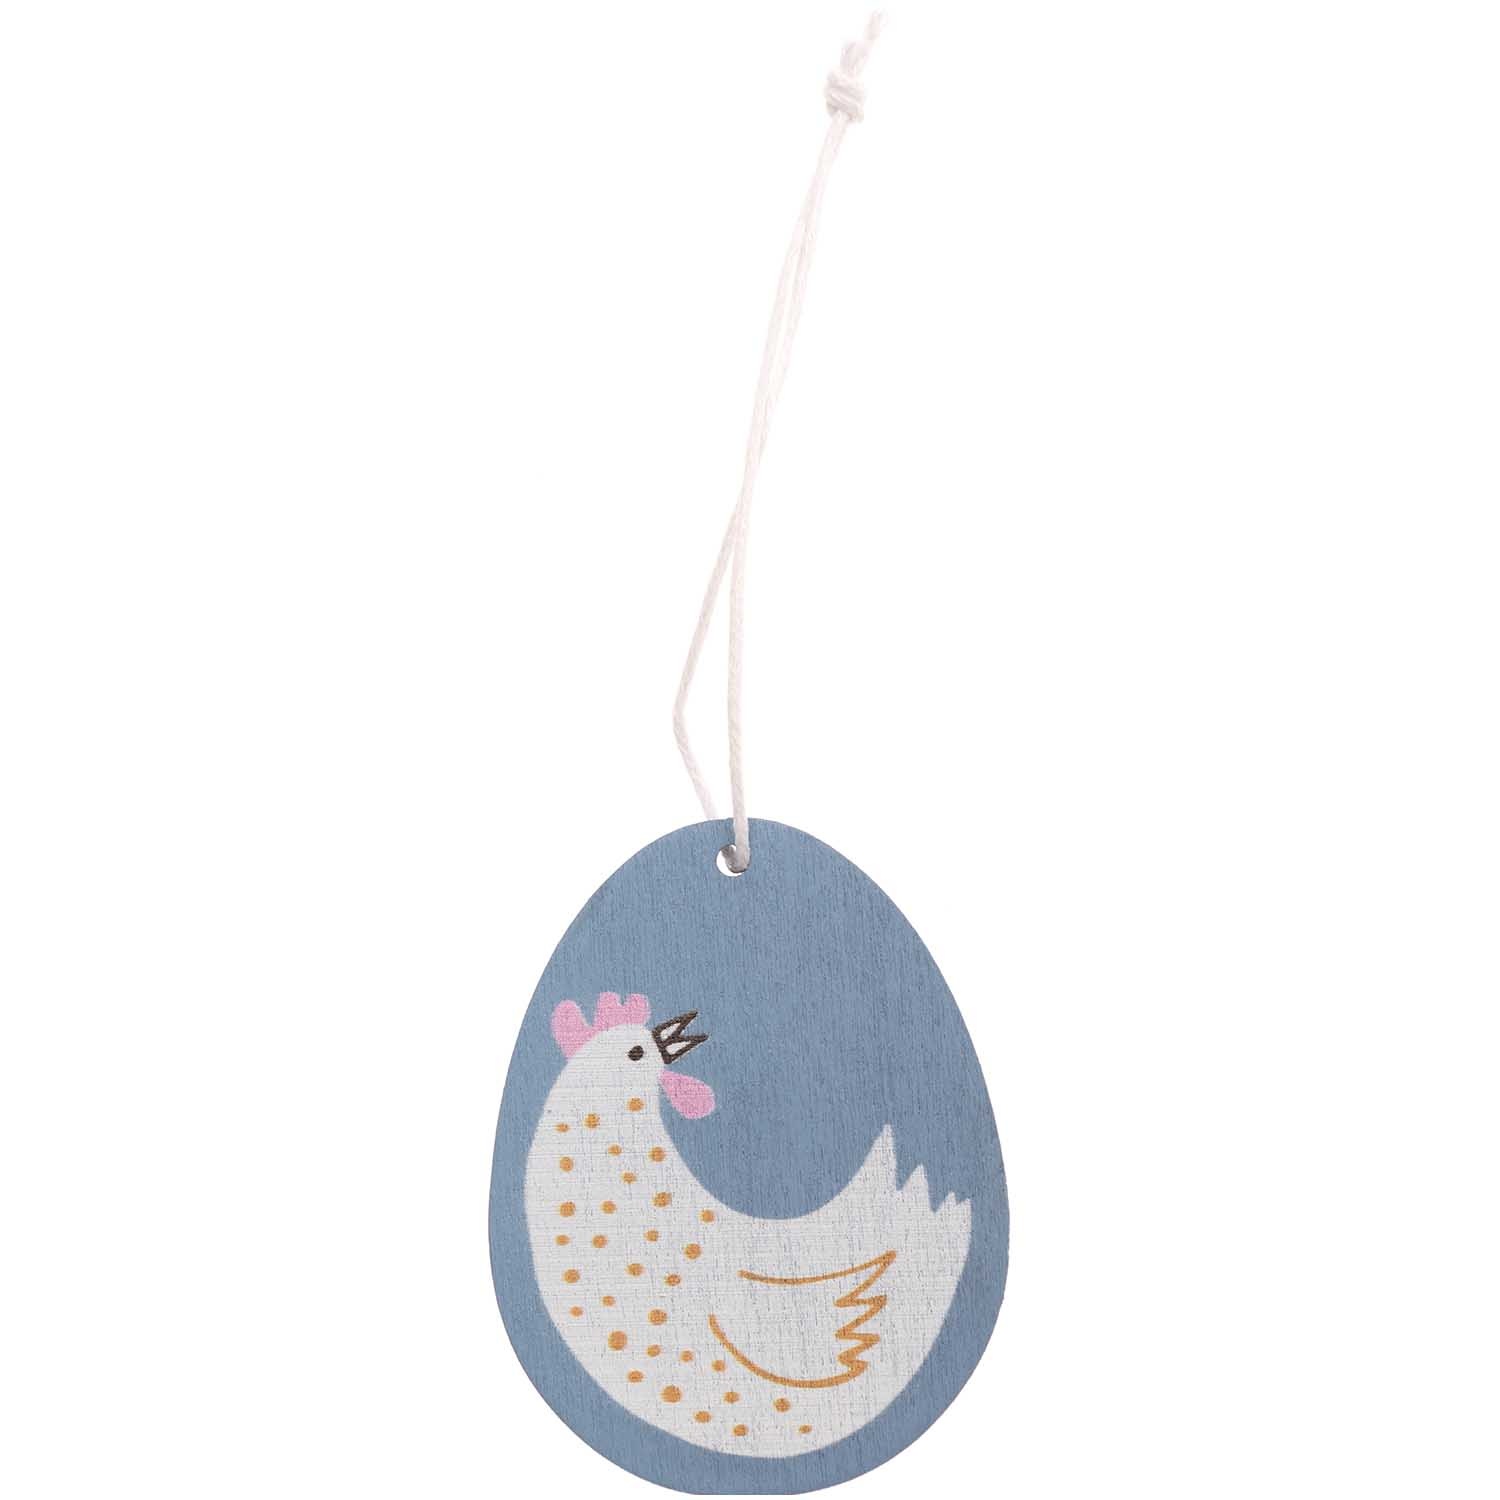 RICO WOODEN TAG EASTER EGG CHICKEN  1 PC, 46mm x 60mm